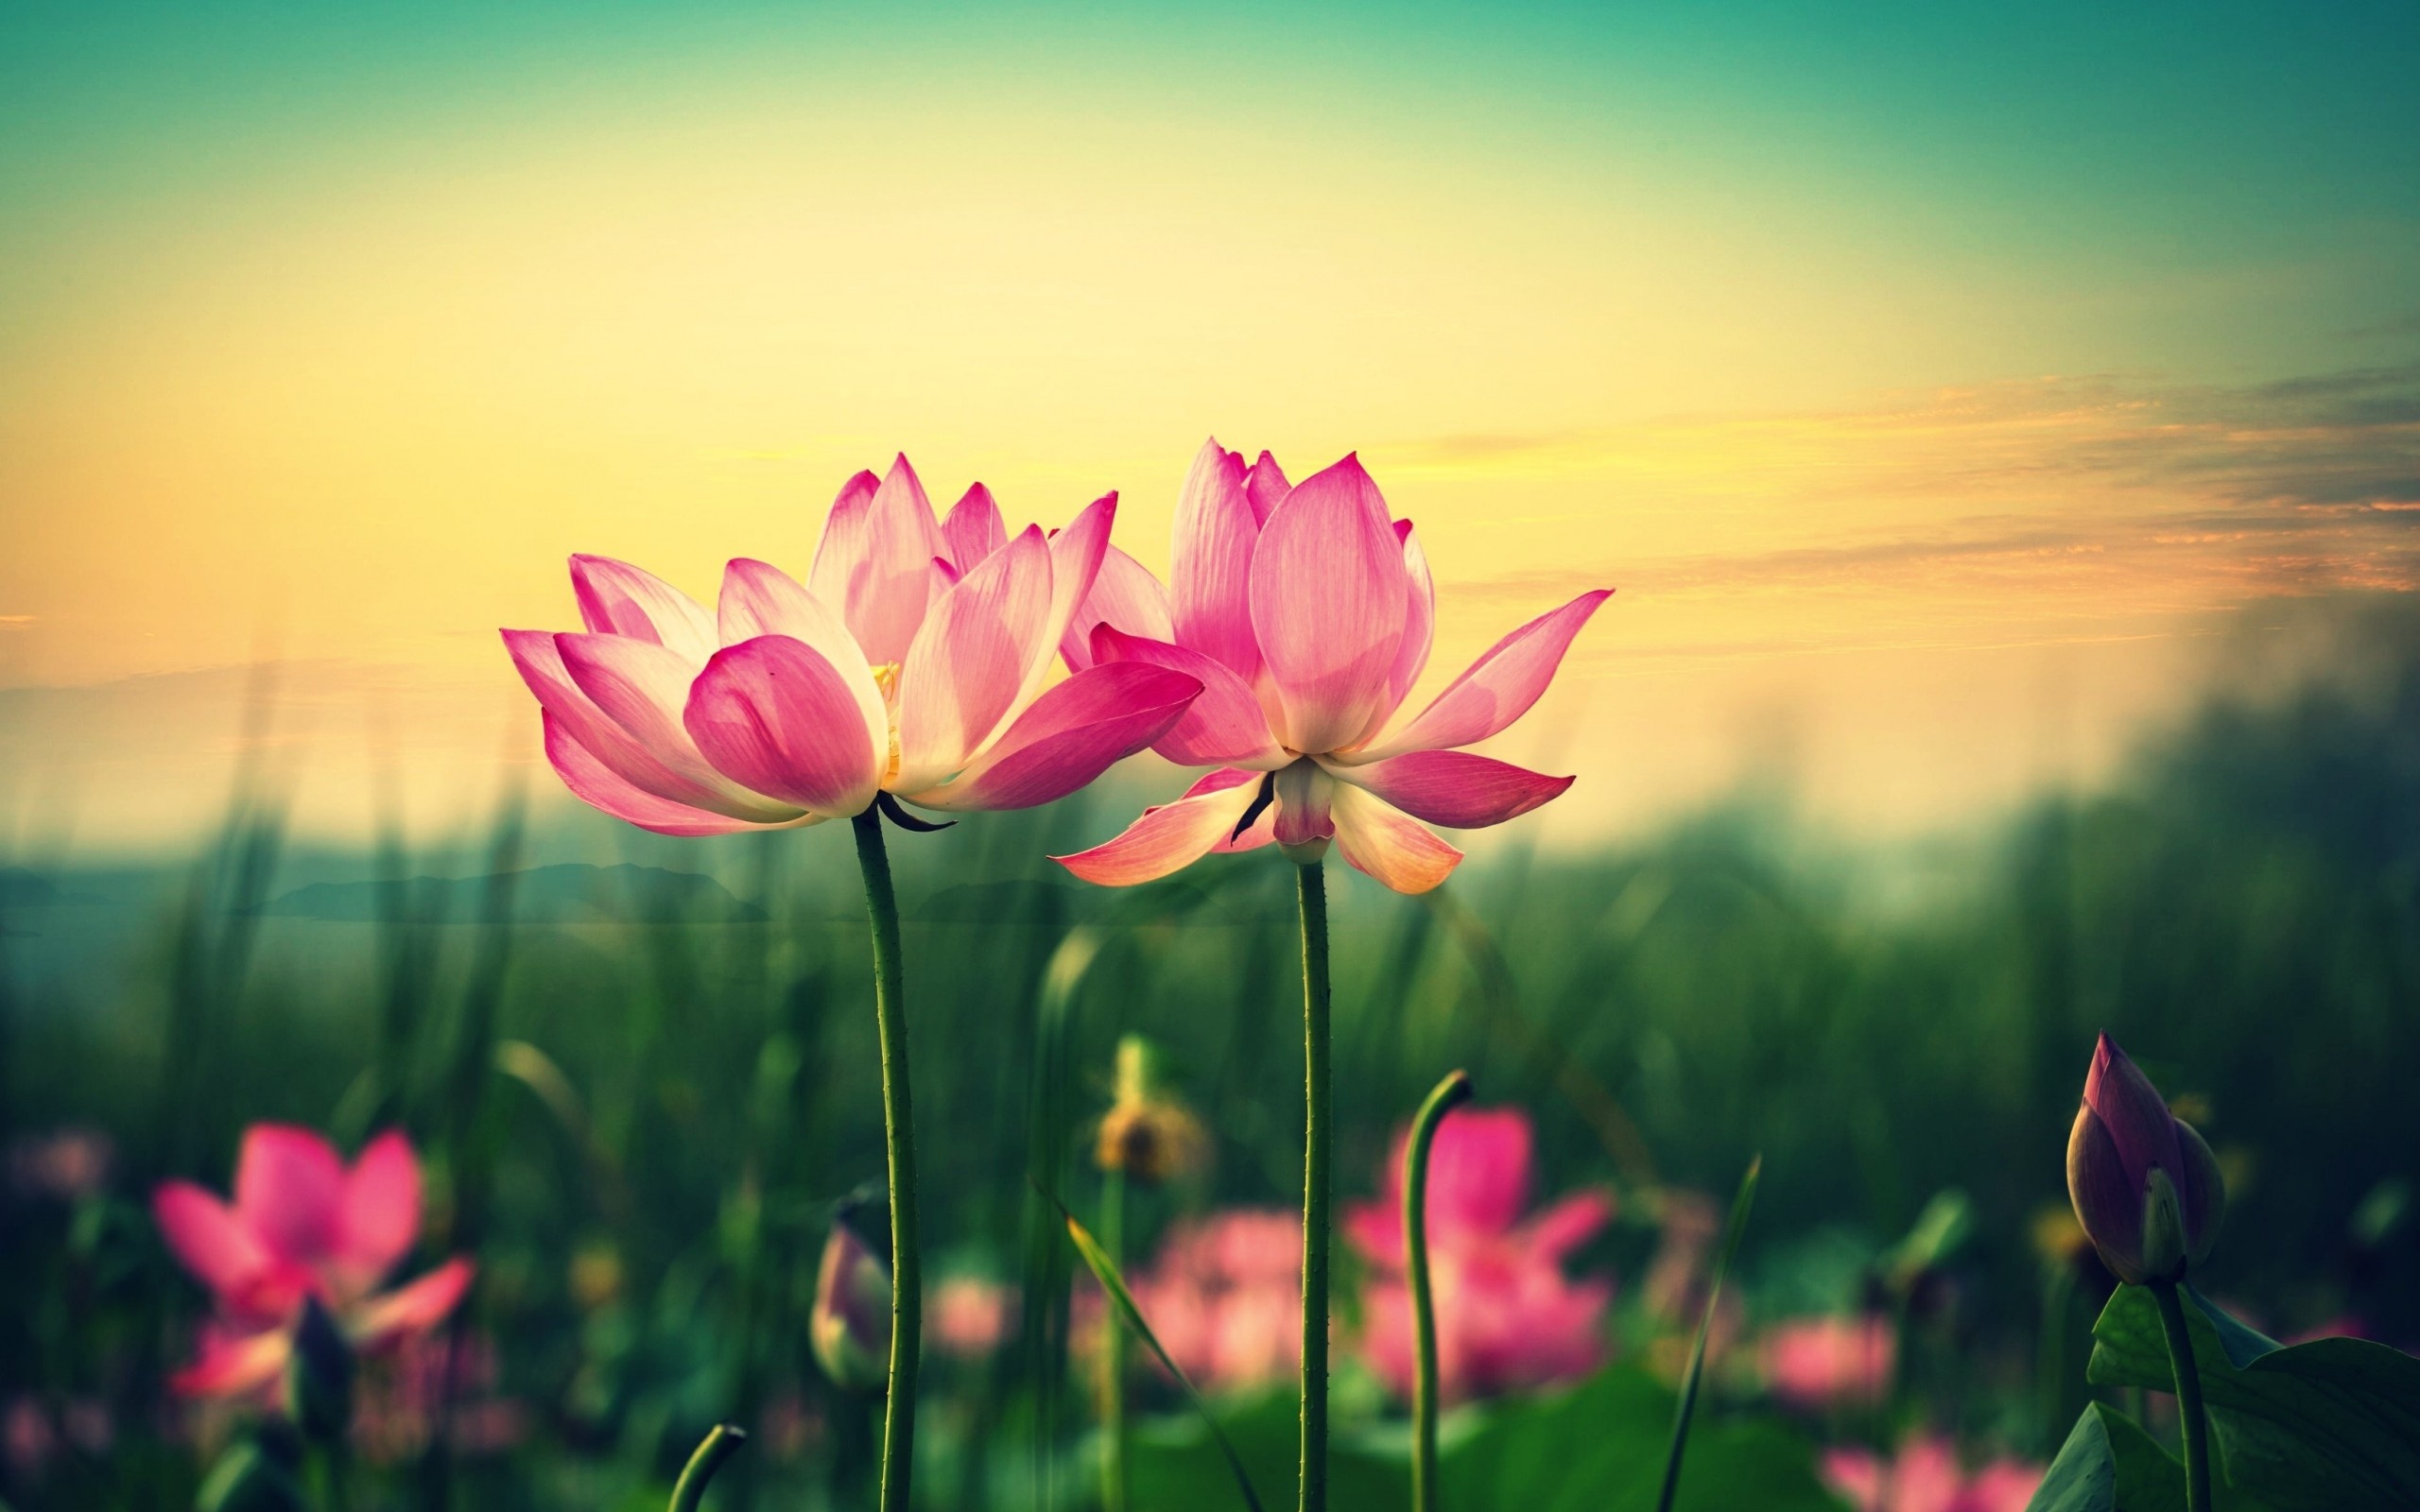 Lotus Flower In Blooming At Sunset Wallpapers   2560x1600   569390 2560x1600